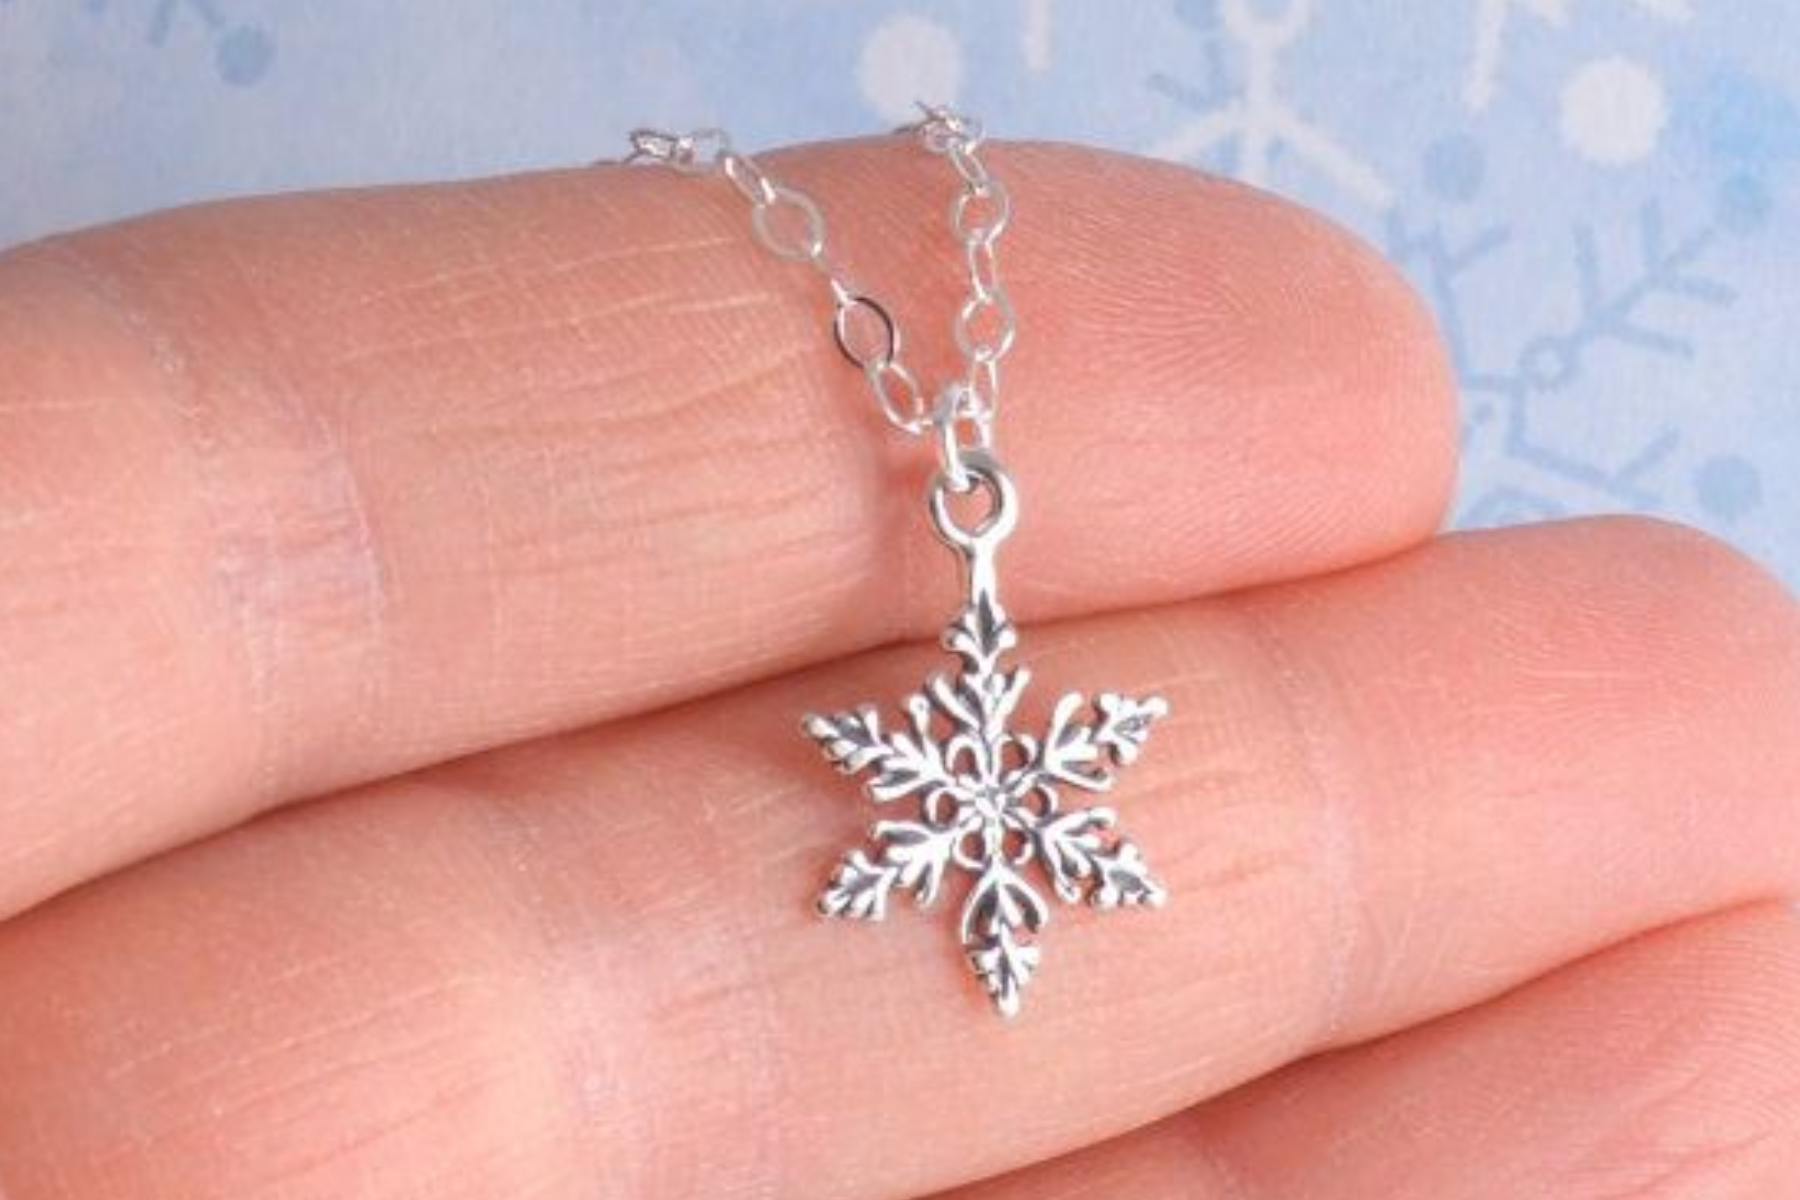 Snowflake Necklaces For Winter - Spreading Winter Cheer